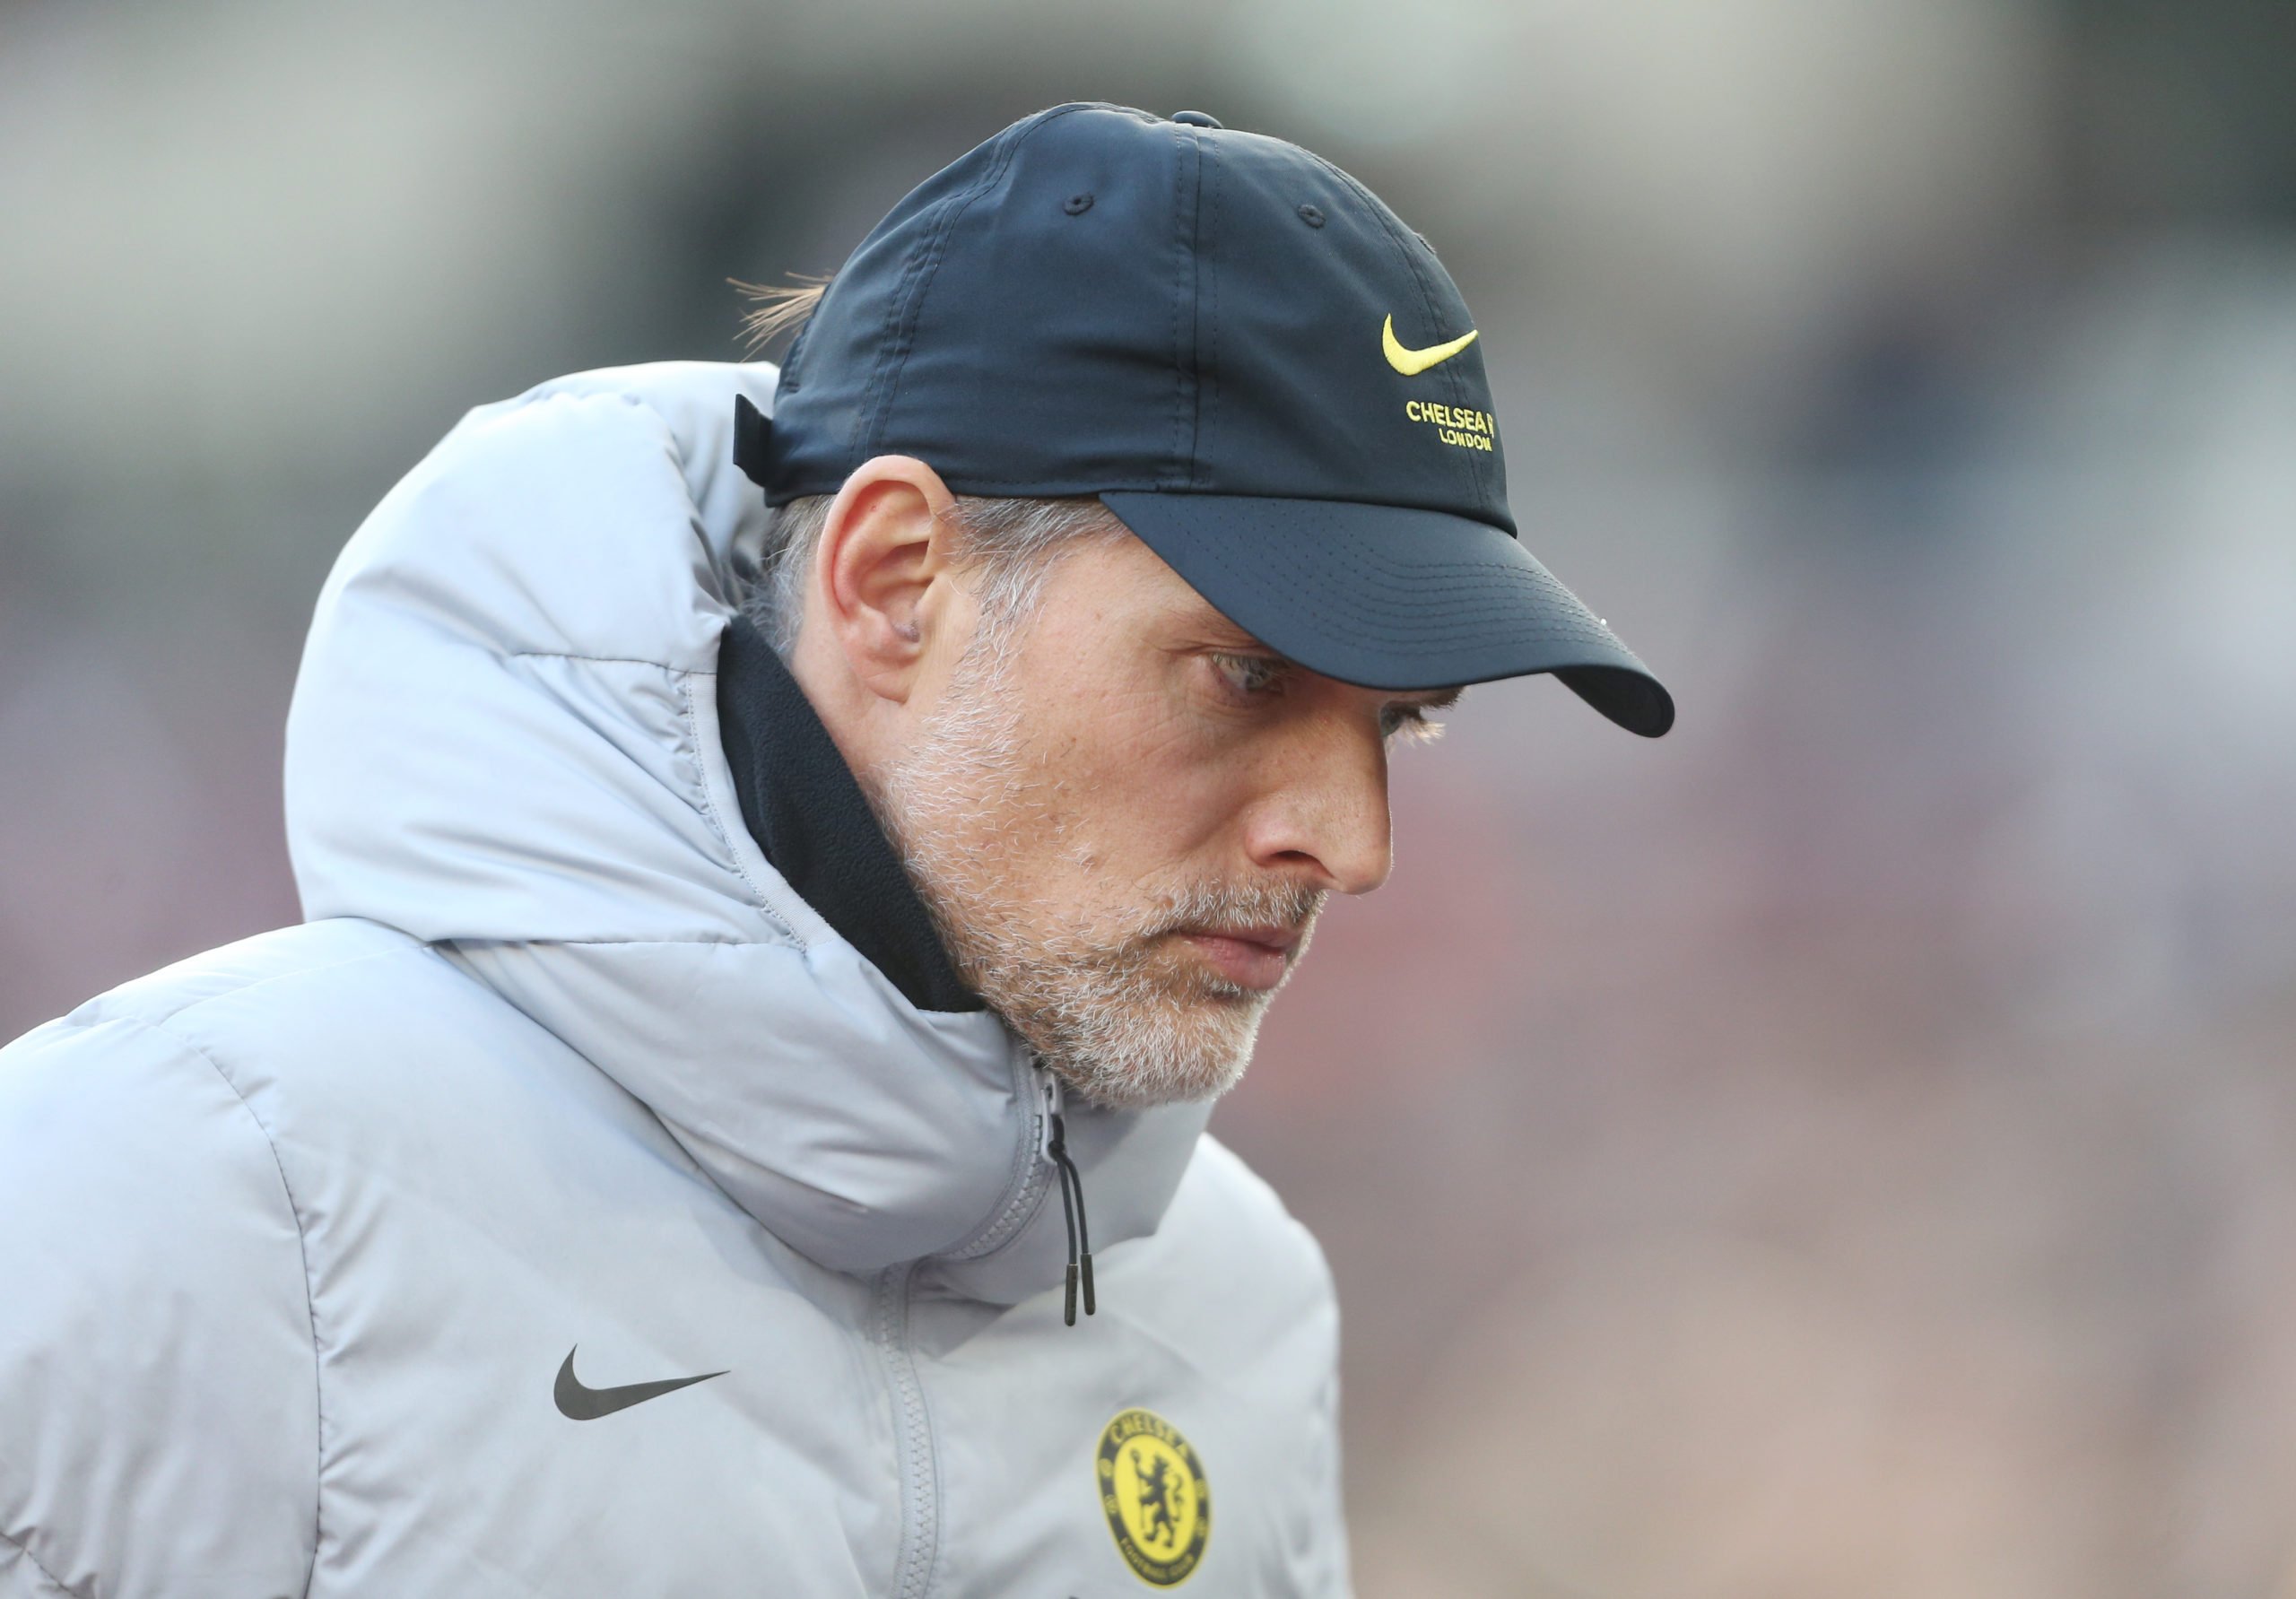 Tuchel provides concerning injury updates on three Chelsea players after West Ham defeat